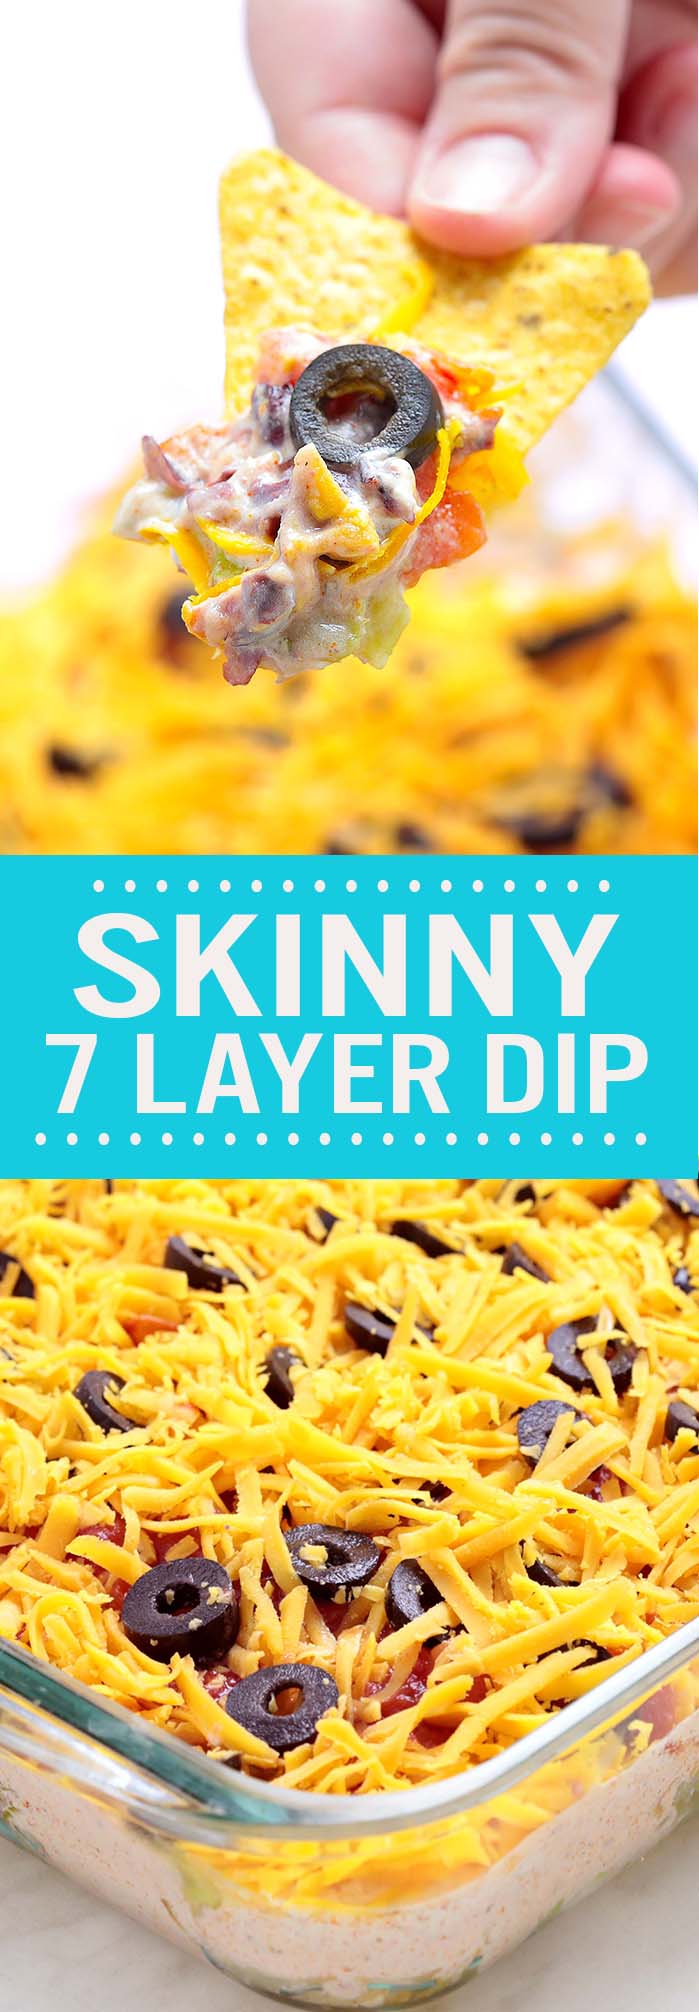 Skinny 7 Layer Dip - A must have at every large get together: birthdays, football, holidays.....